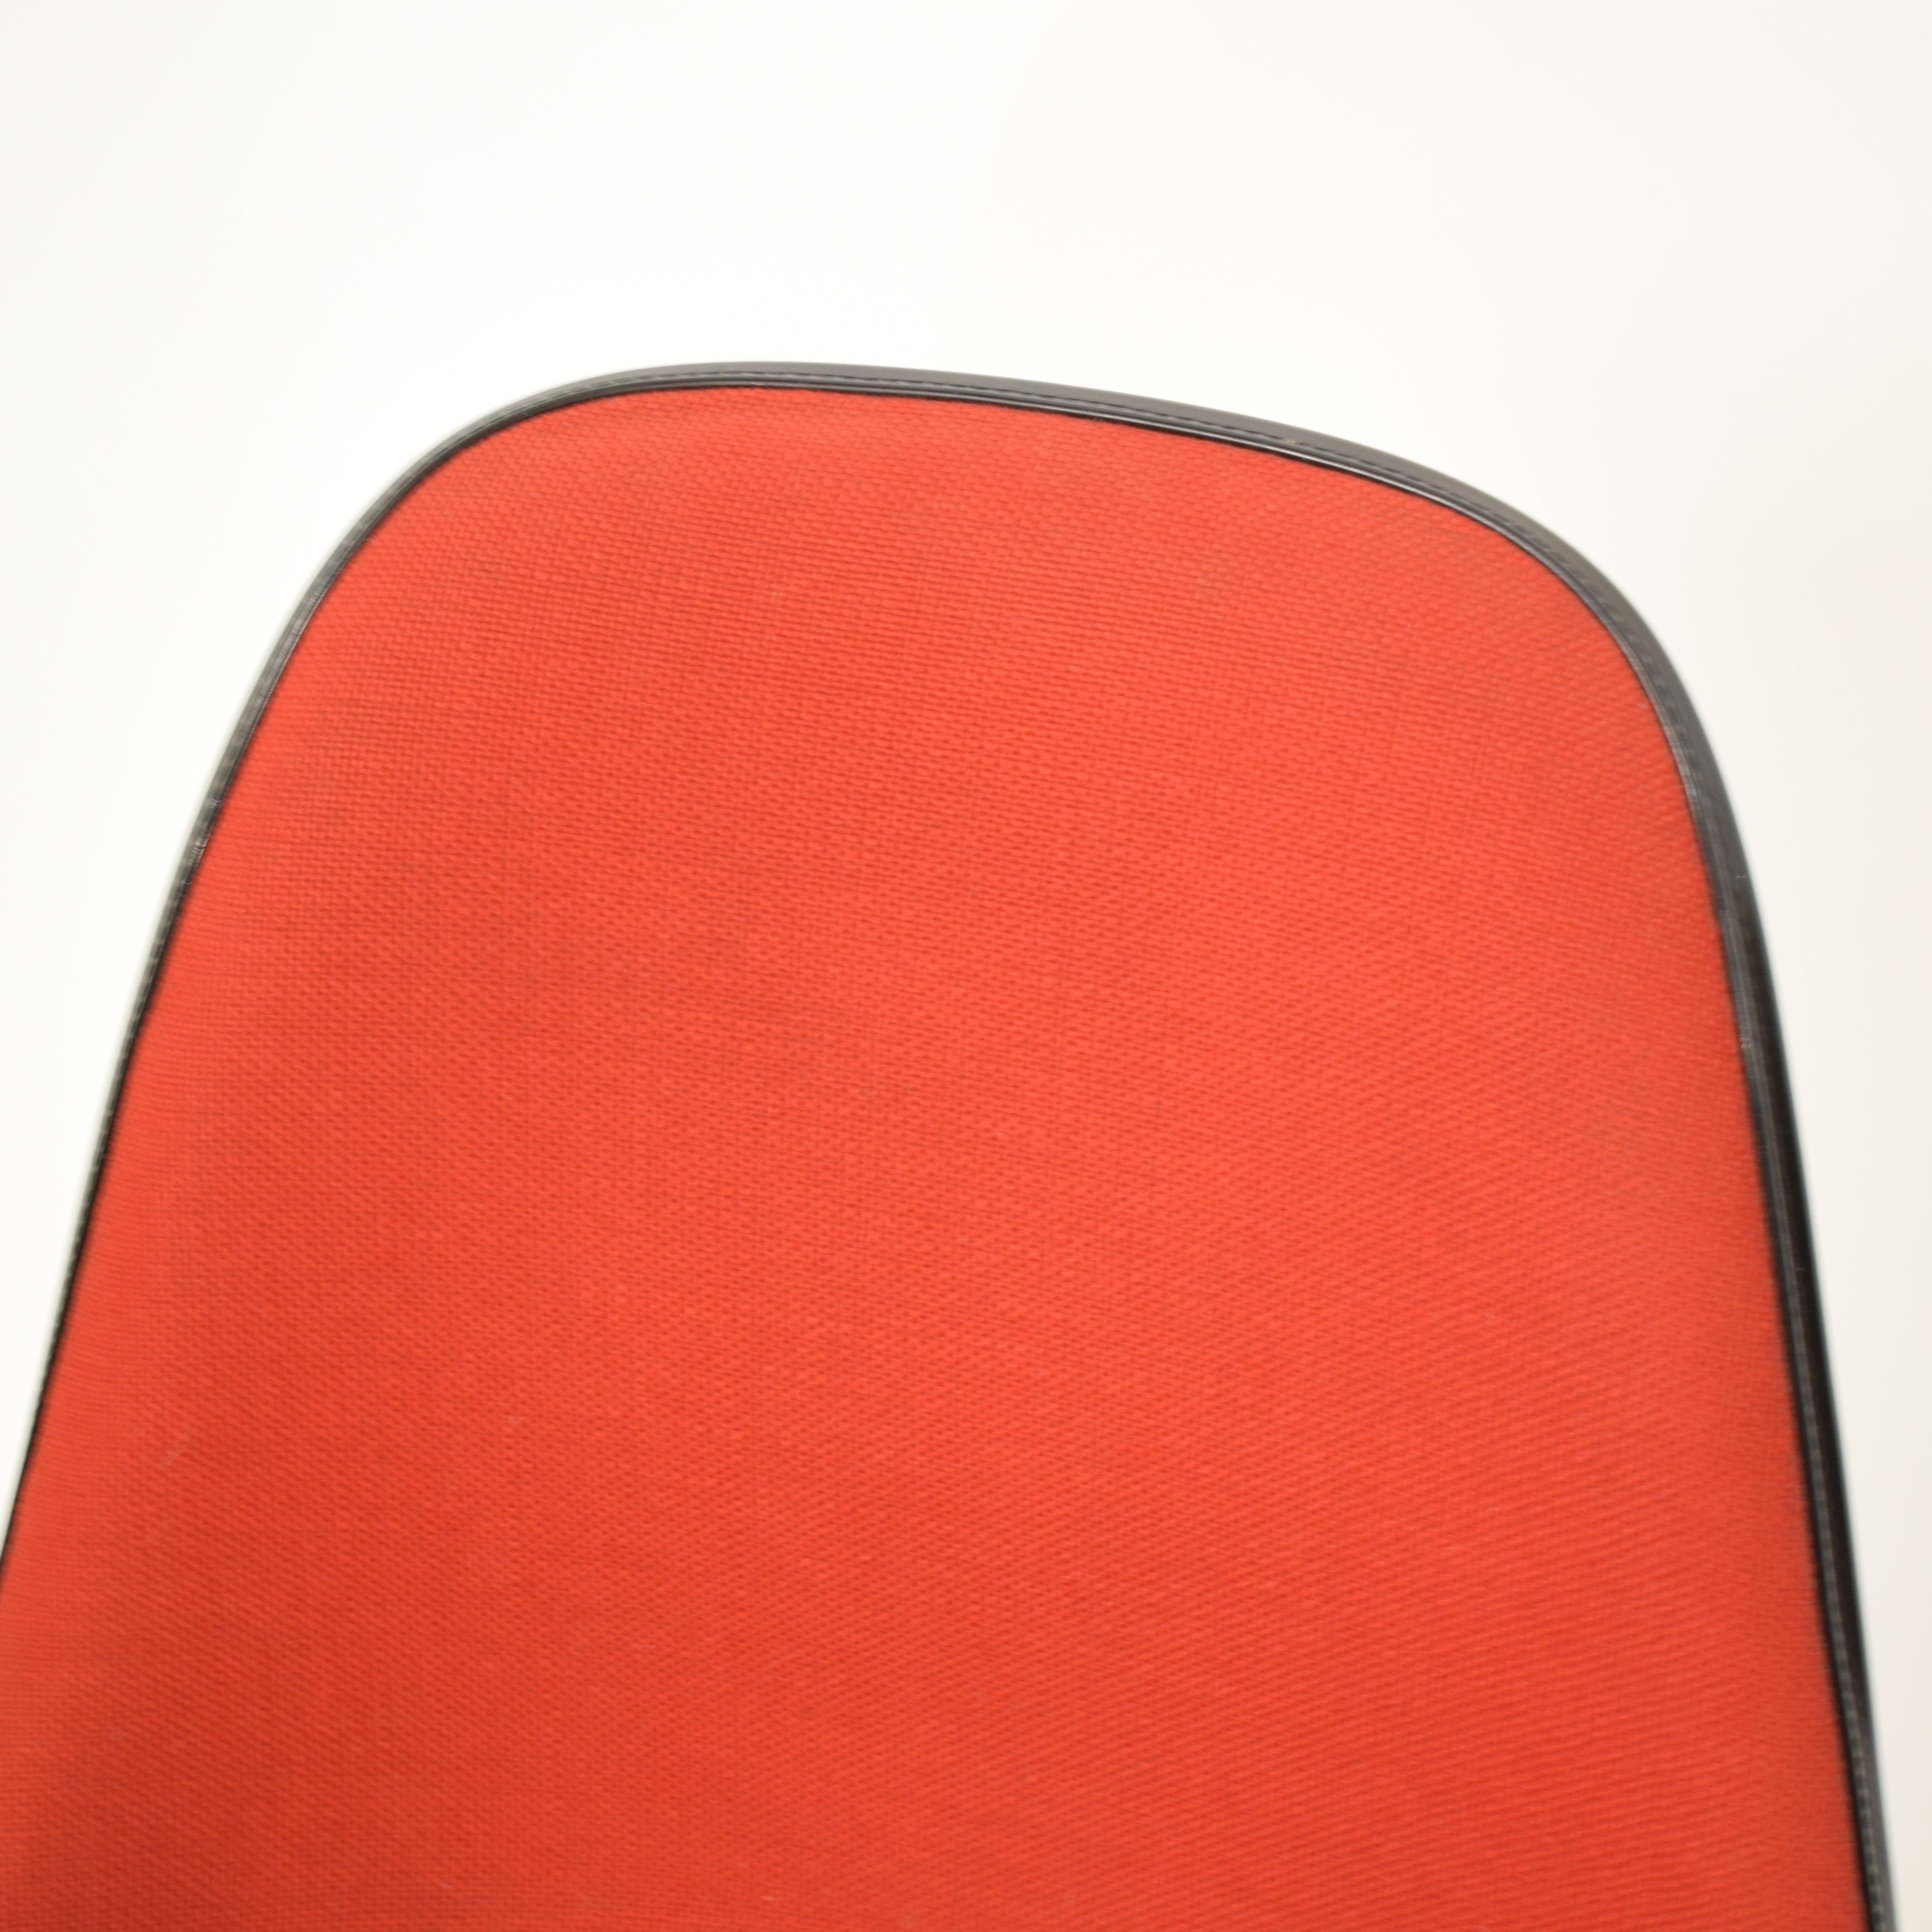 Swiss Midcentury Padded Red Side /Pedestal Chair by Eames by Vitra for Herman Miller